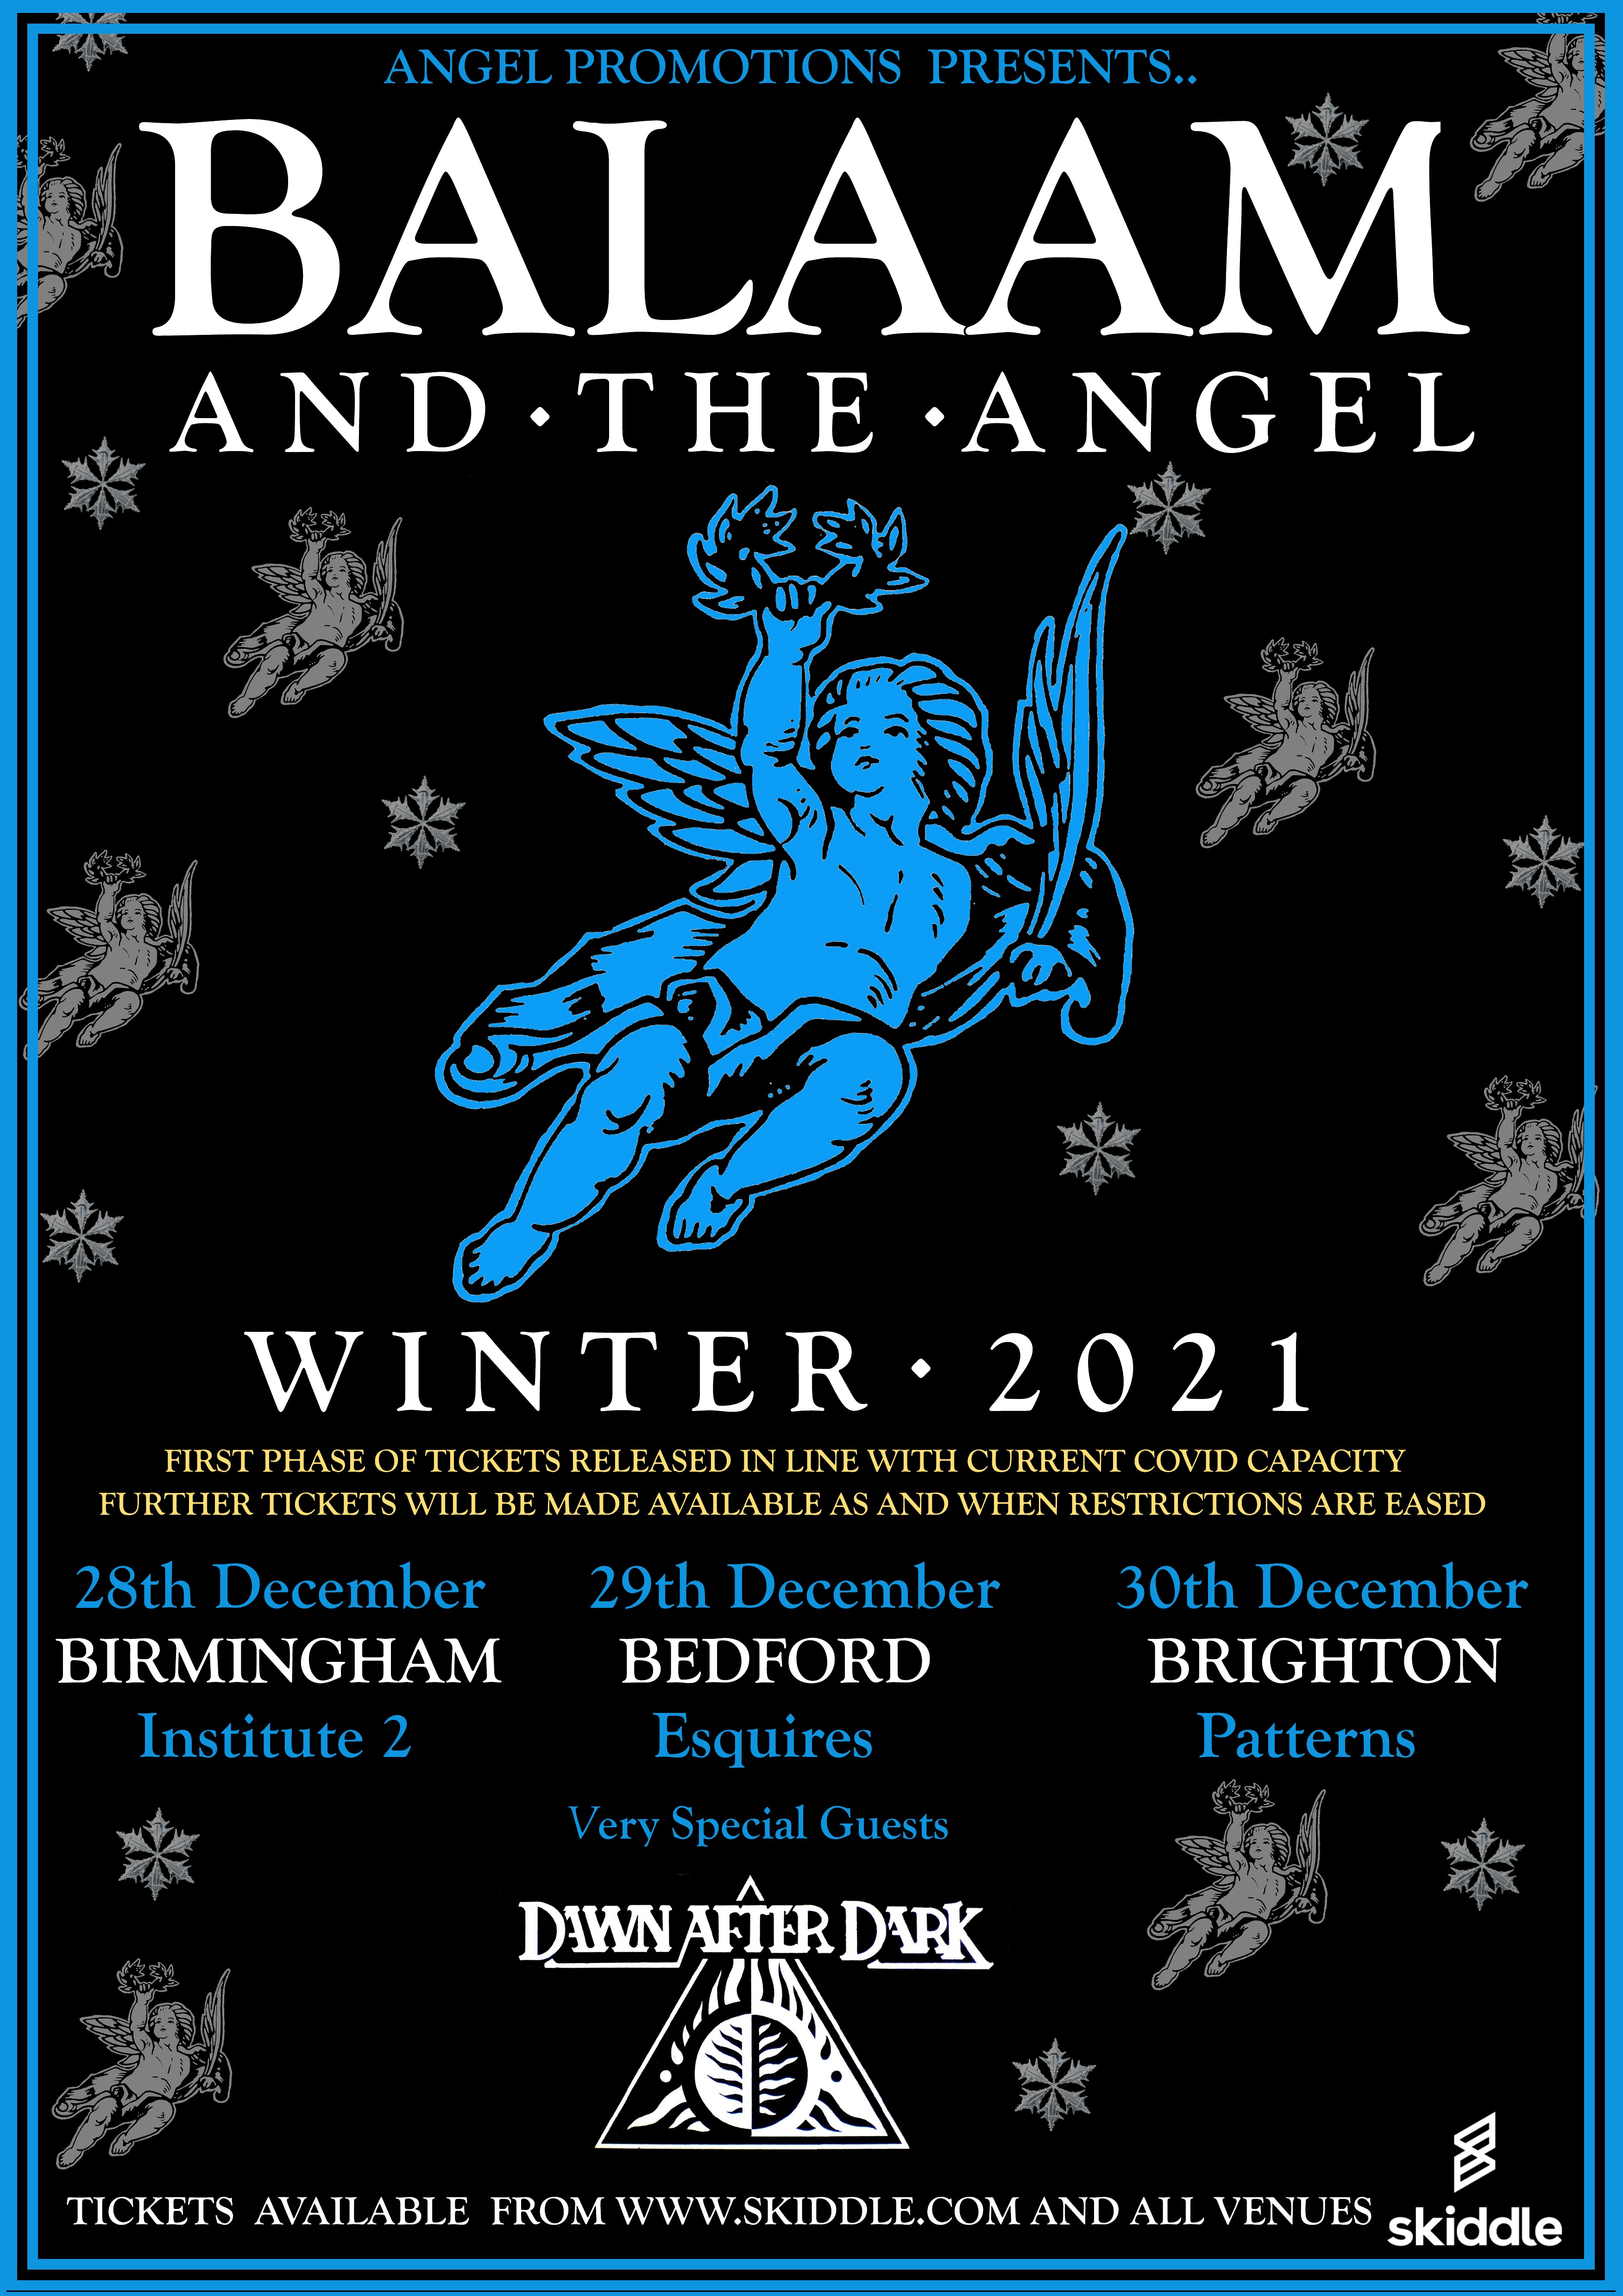 DAWN AFTER DARK ANNOUNCE THREE DECEMBER SHOWS AS VERY SPECIAL GUESTS OF BALAAM AND THE ANGEL